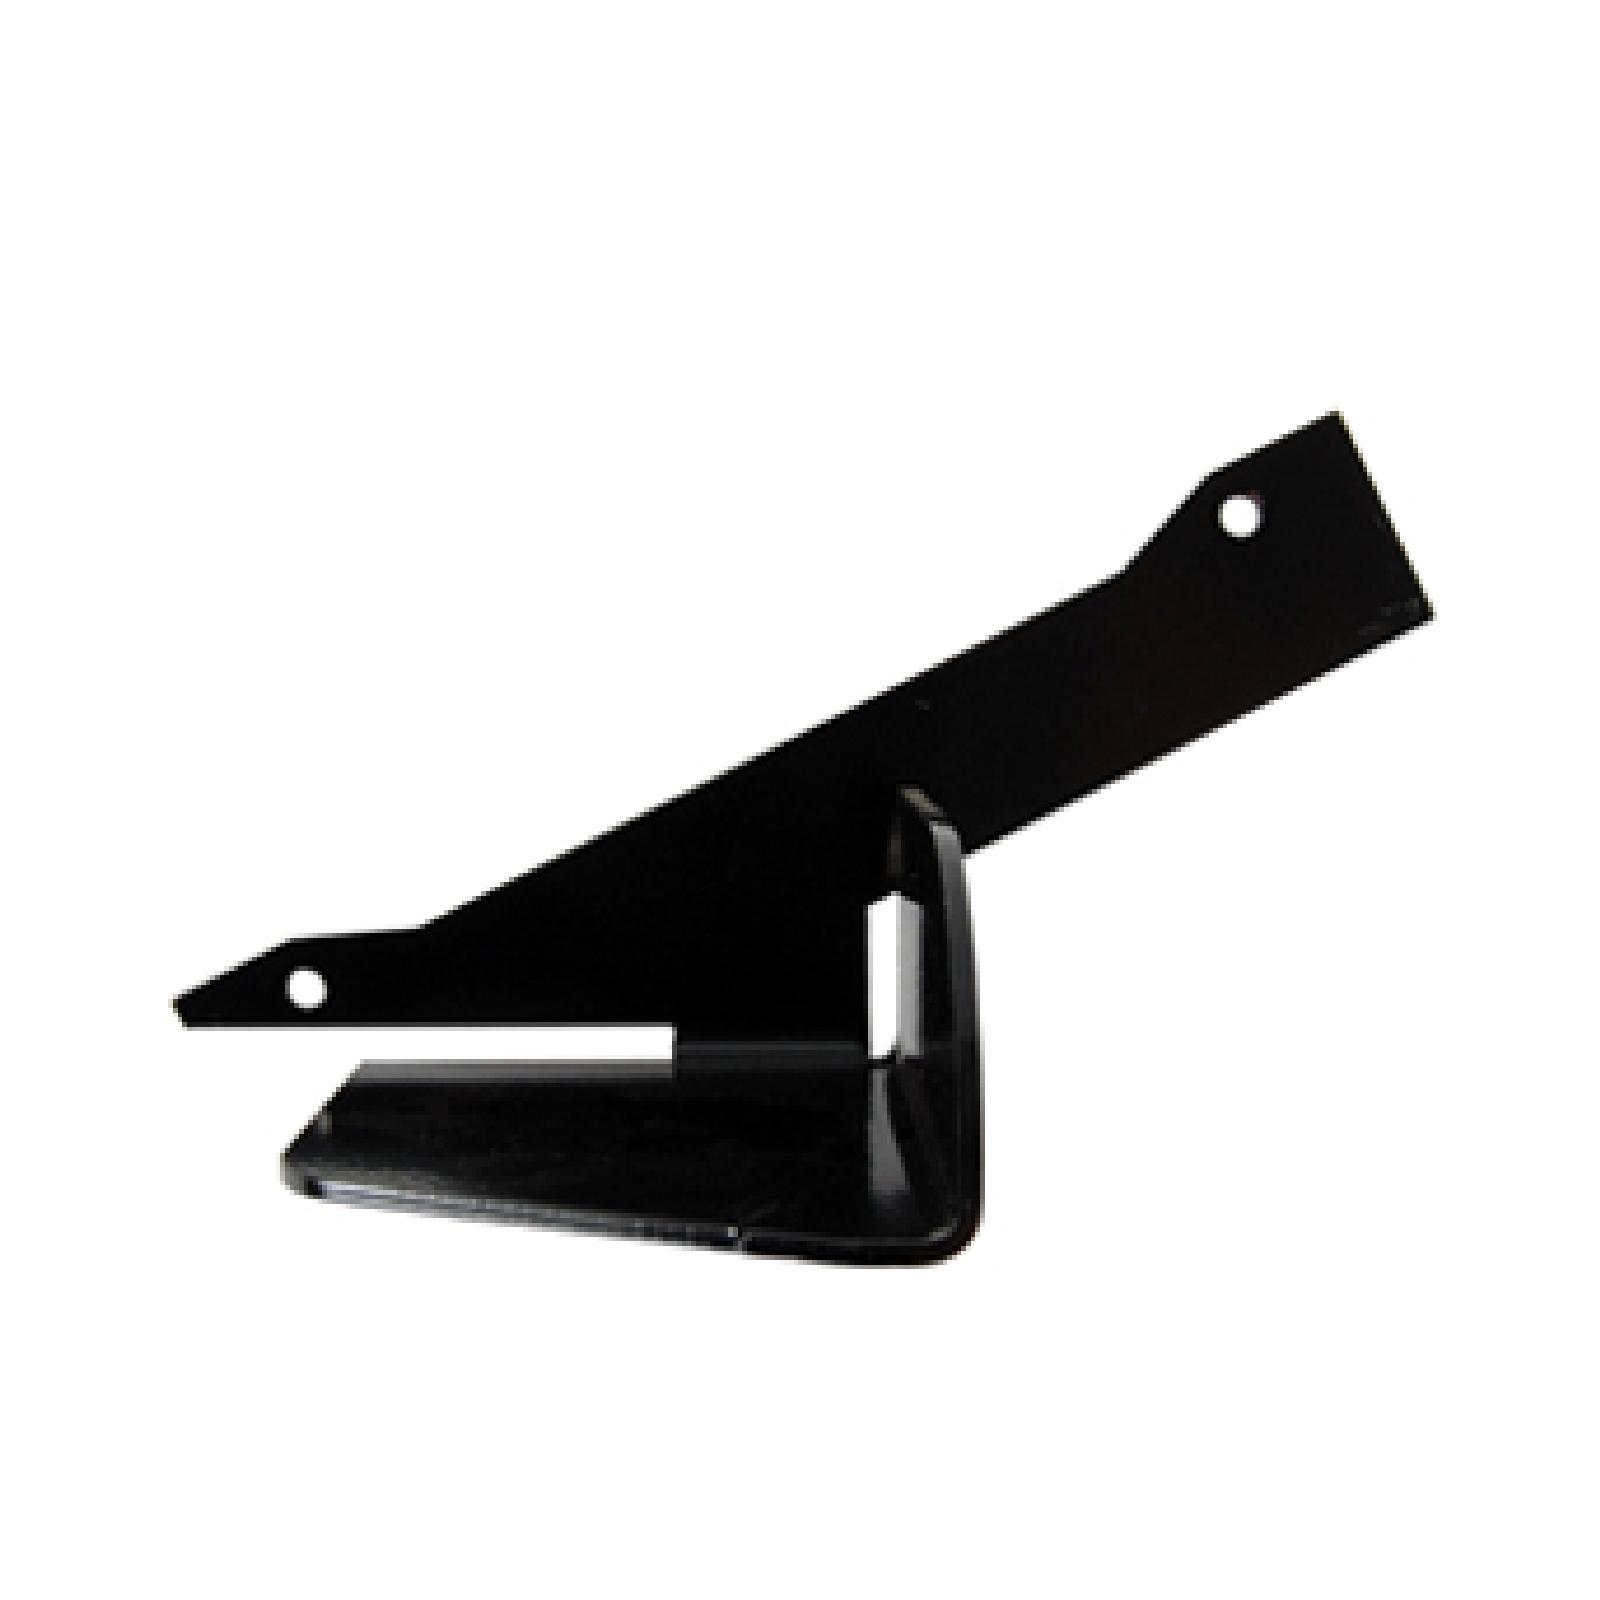 GRIP HANDLE BLK part# 720-0274 by MTD